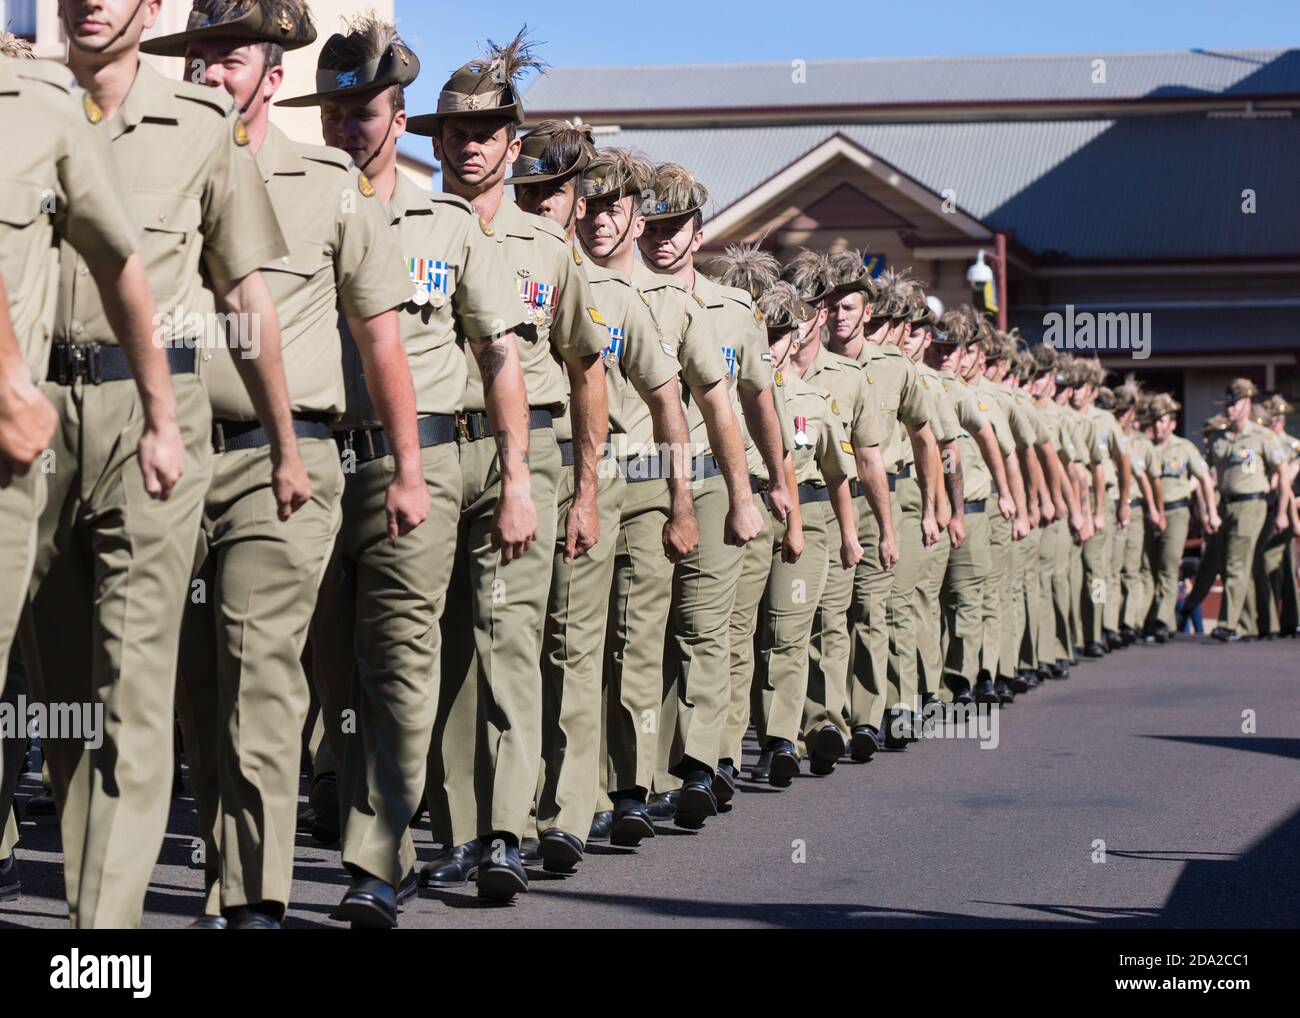 Charters Towers, Australia April 25, 2015: Anzac Day Parade with soldiers marching down main street of town Stock Photo